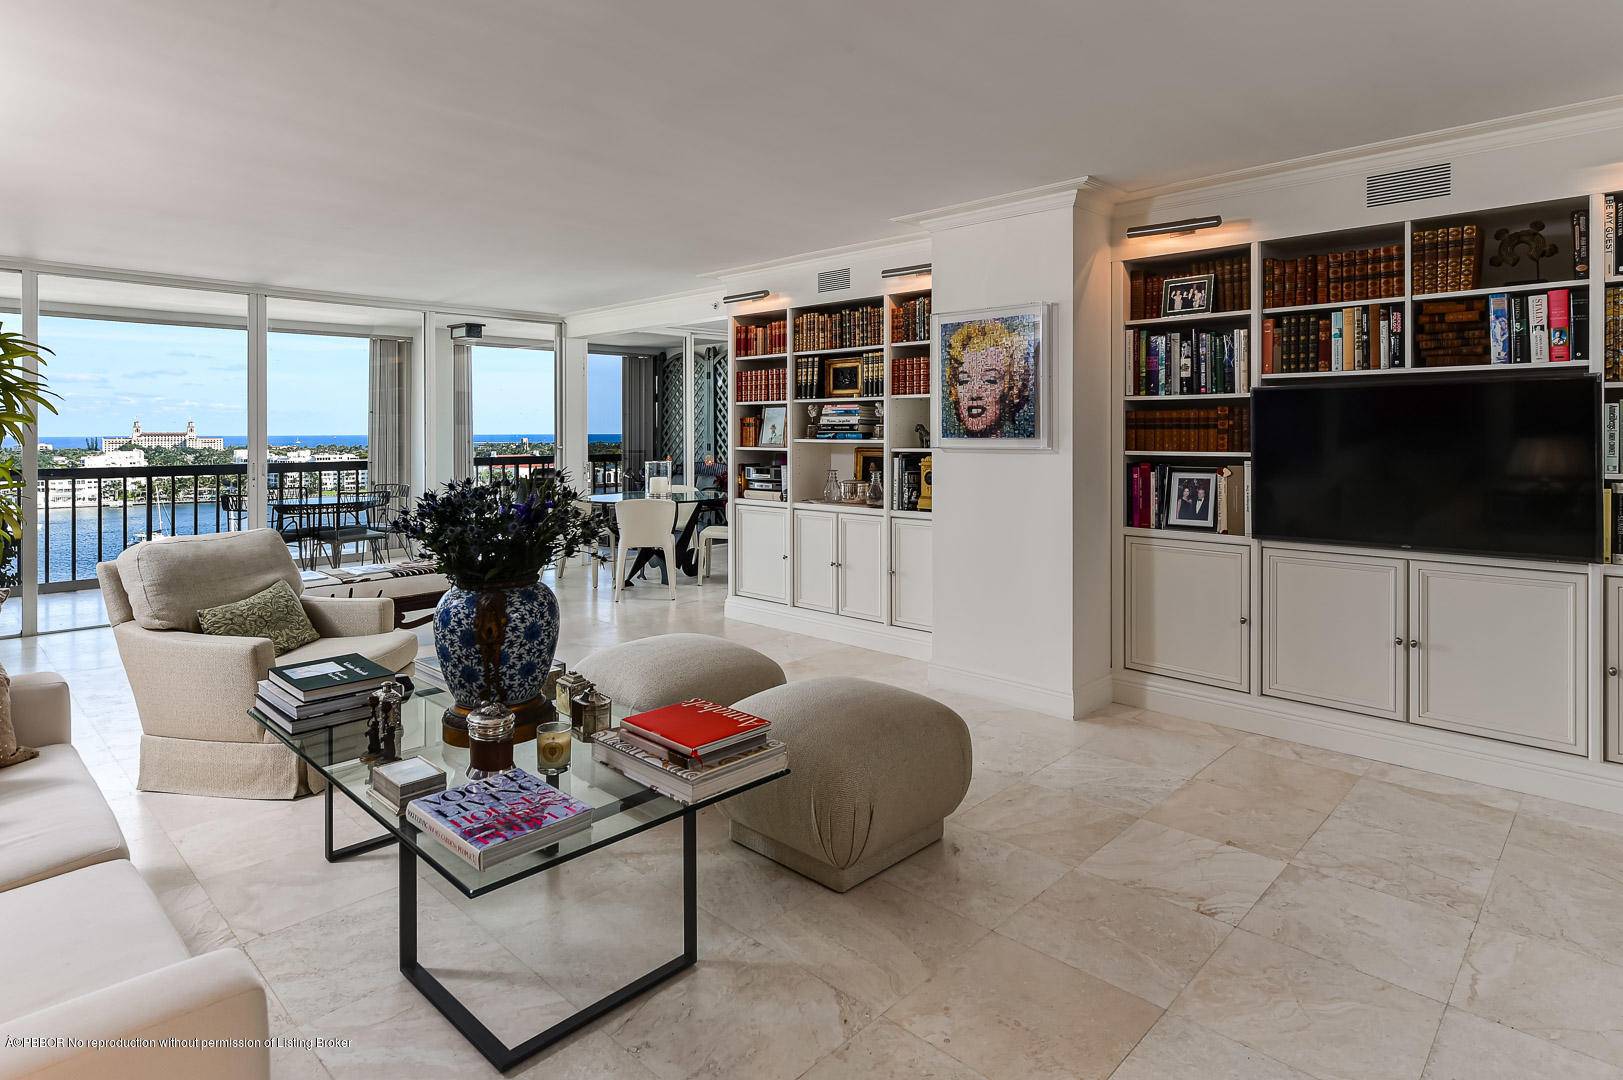 Stunning ocean and harbor views from this renovated 3 bedroom unit.